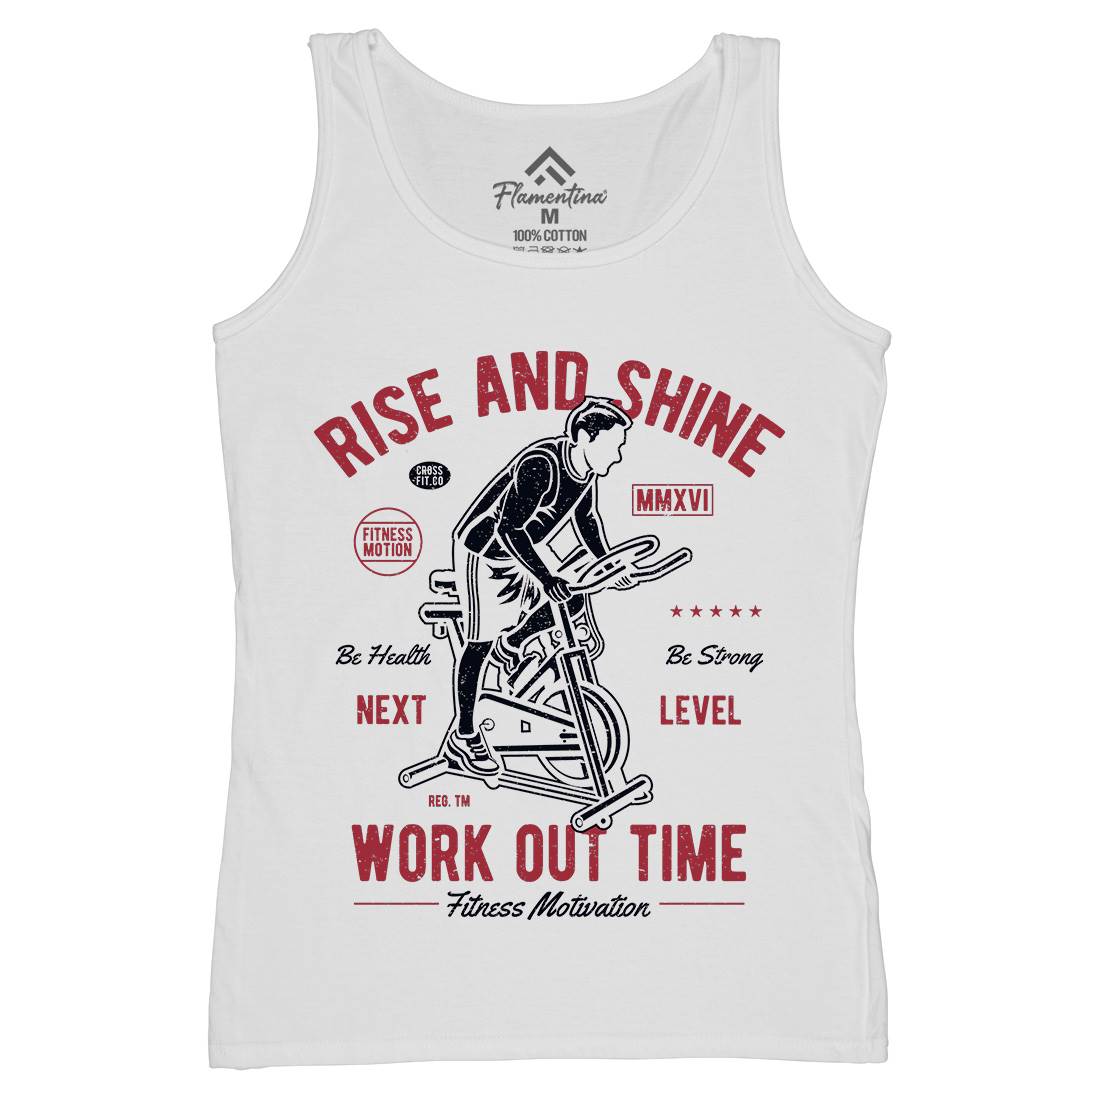 Work Out Time Womens Organic Tank Top Vest Gym A199